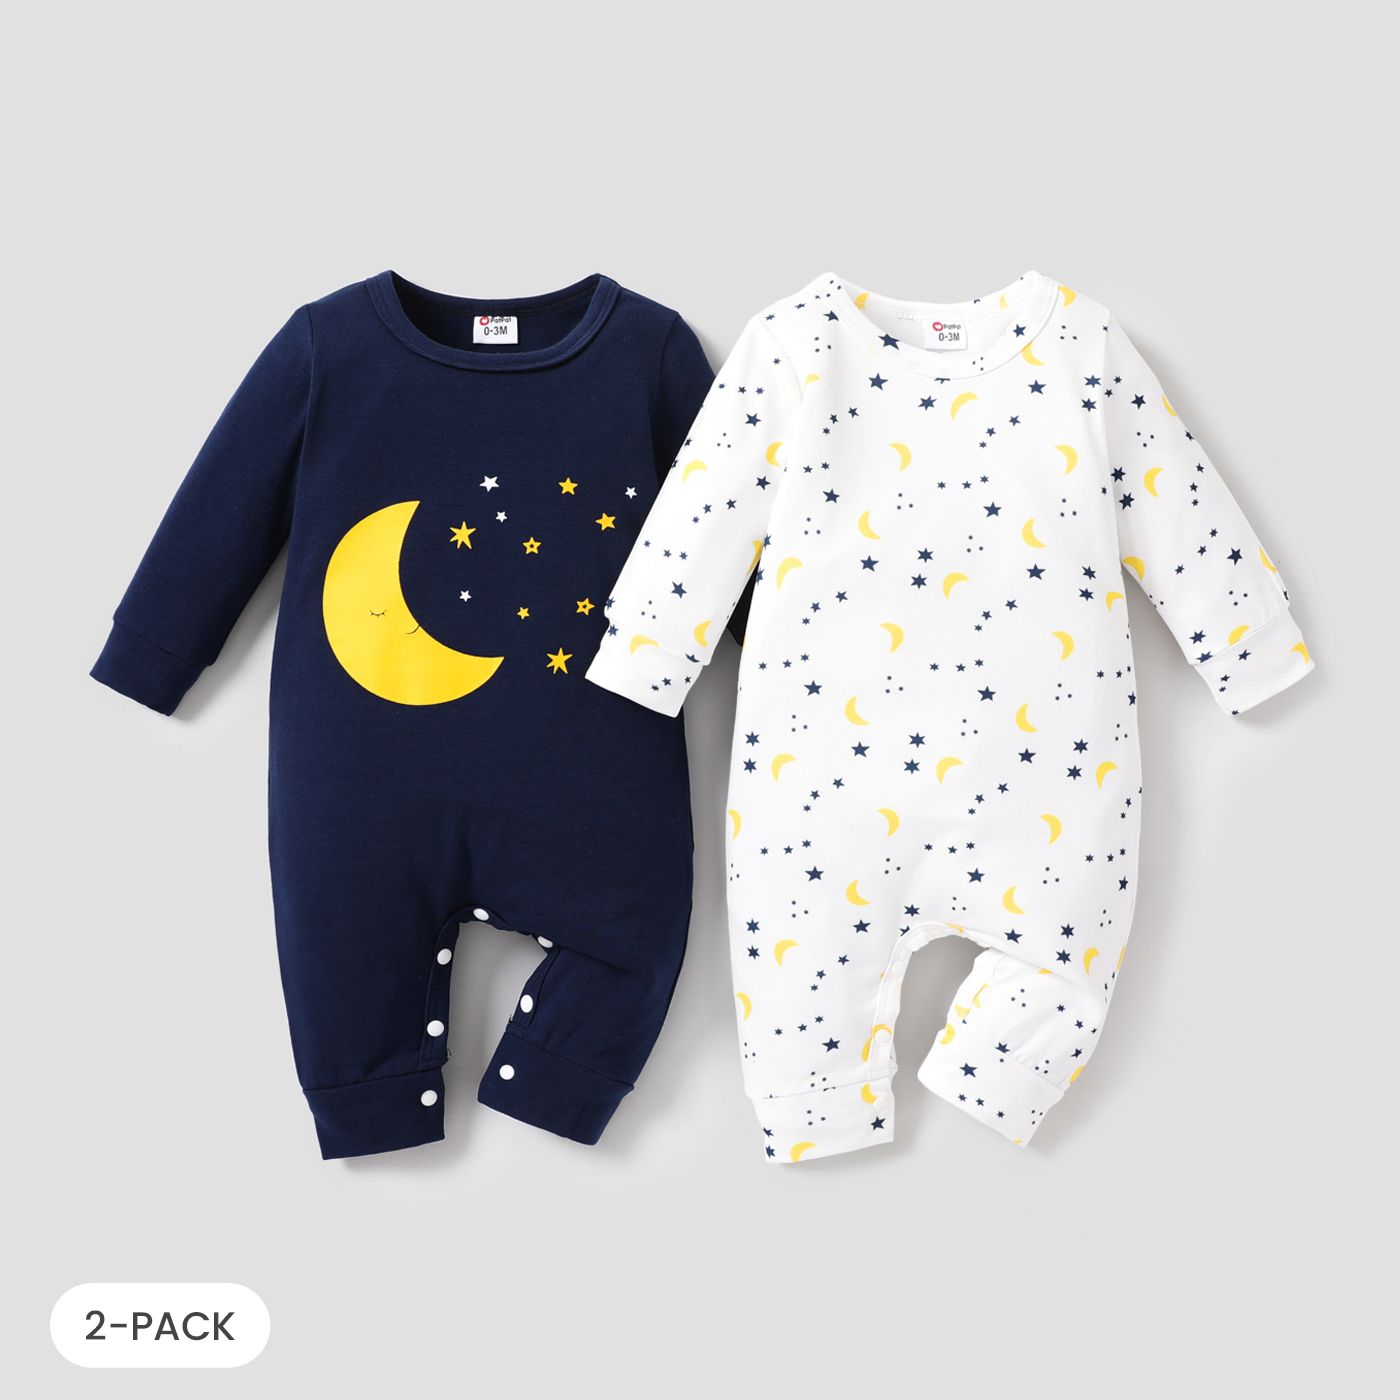 

2-Pack Baby Boy/Girl 95% Cotton Long-sleeve Allover Stars & Moon Print Jumpsuits Set